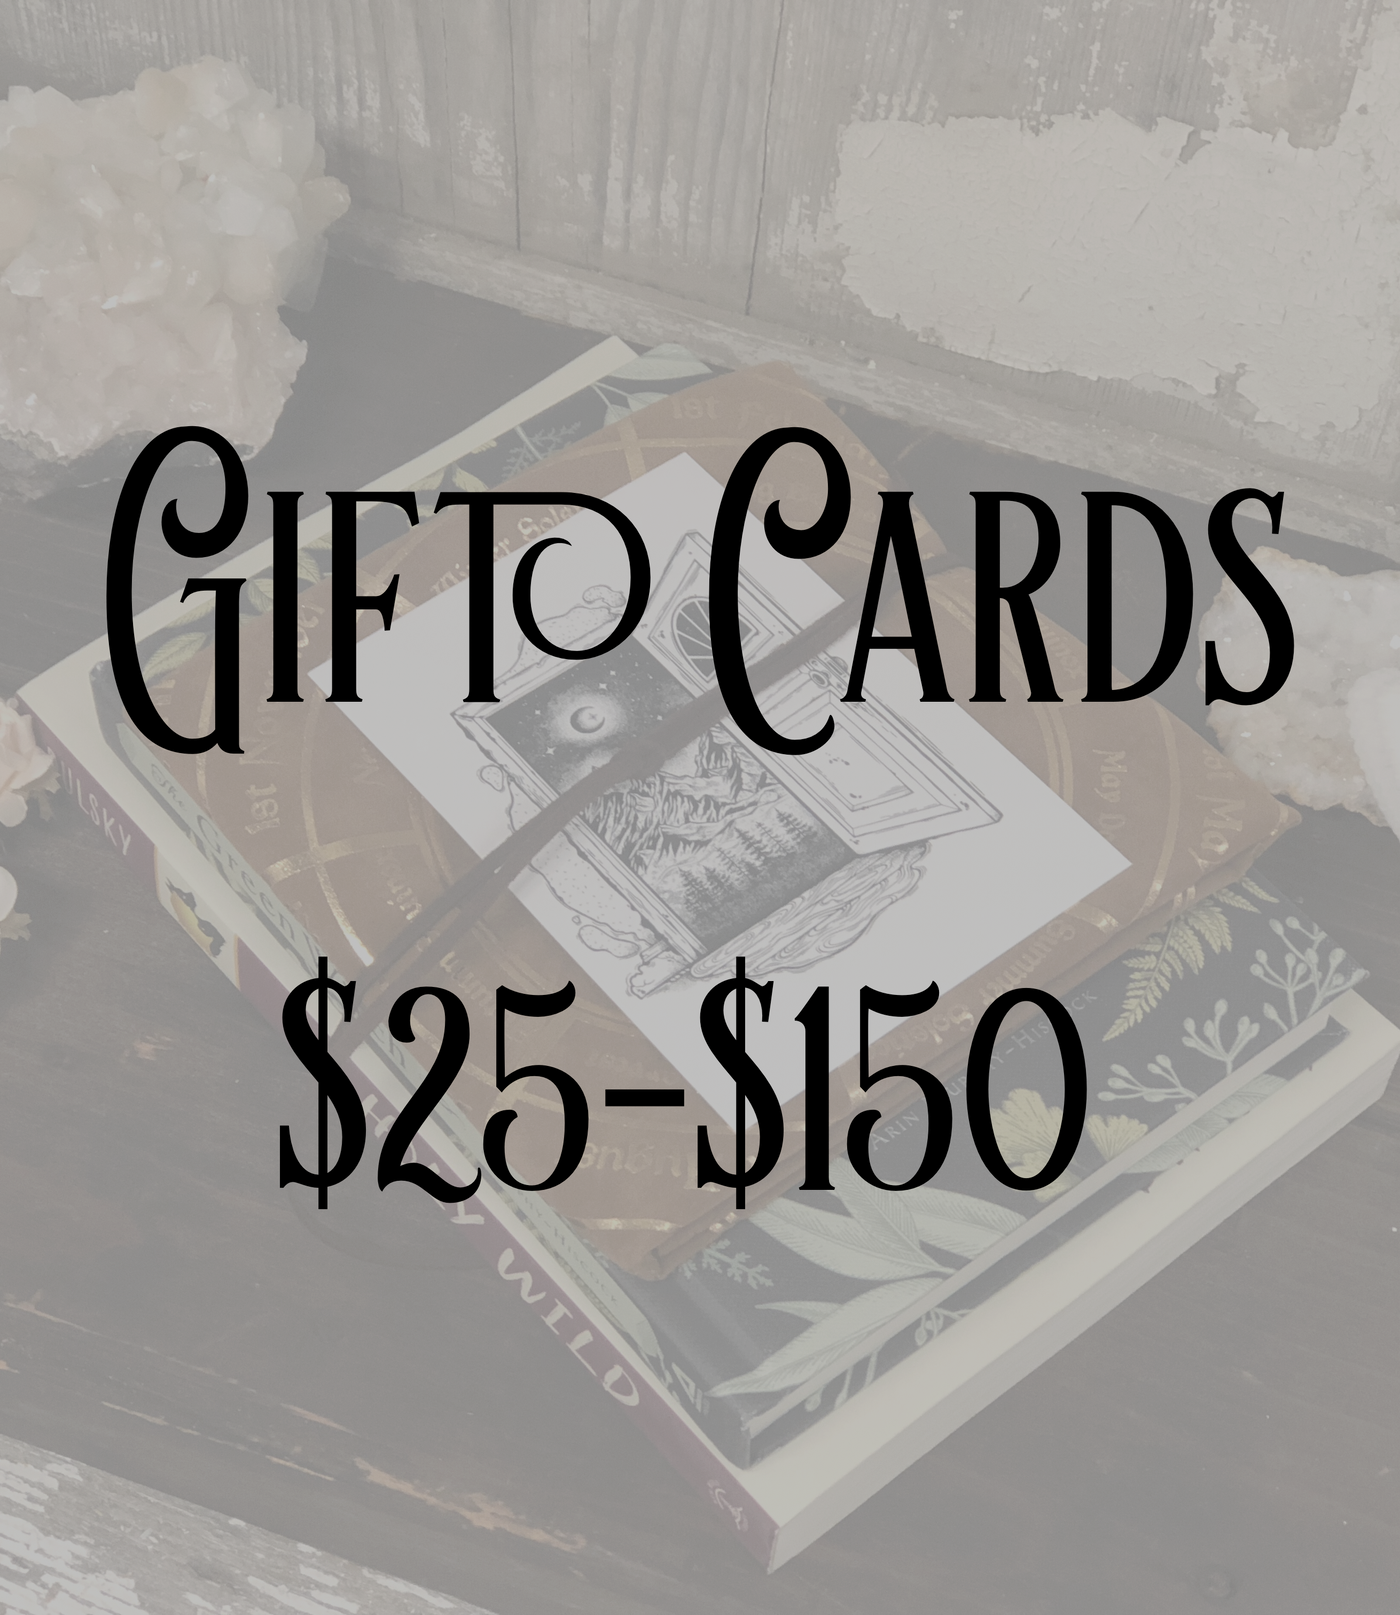 Text "Gift Cards $25-$105" 